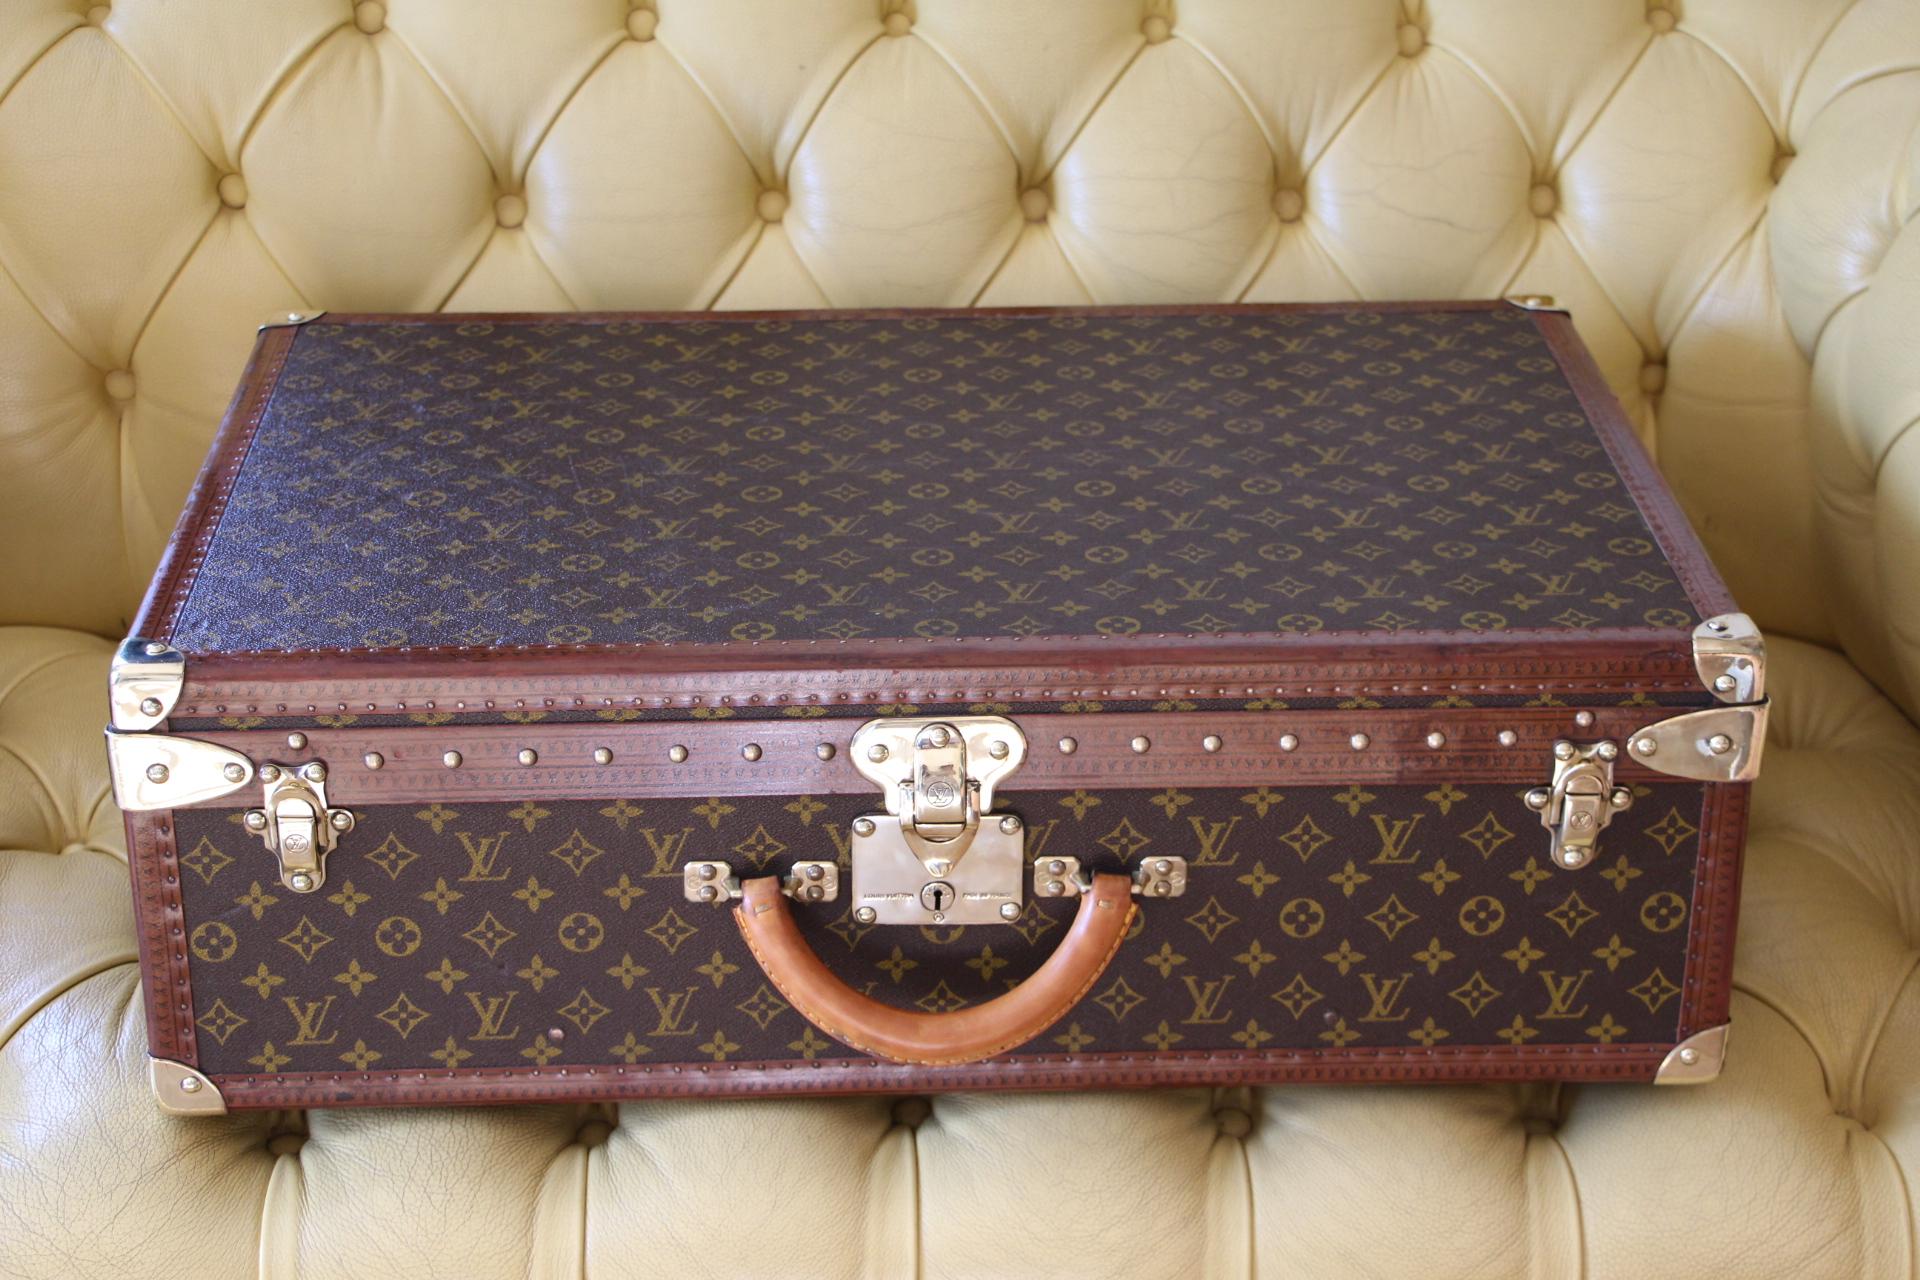 This is a magnificent Louis Vuitton Alzer monogramm suitcase. It features 
all Louis Vuitton stamped solid brass fittings: locks, clasps and studs.
It has got a large and comfortable all leather handle .
As to its interior, it is in very good